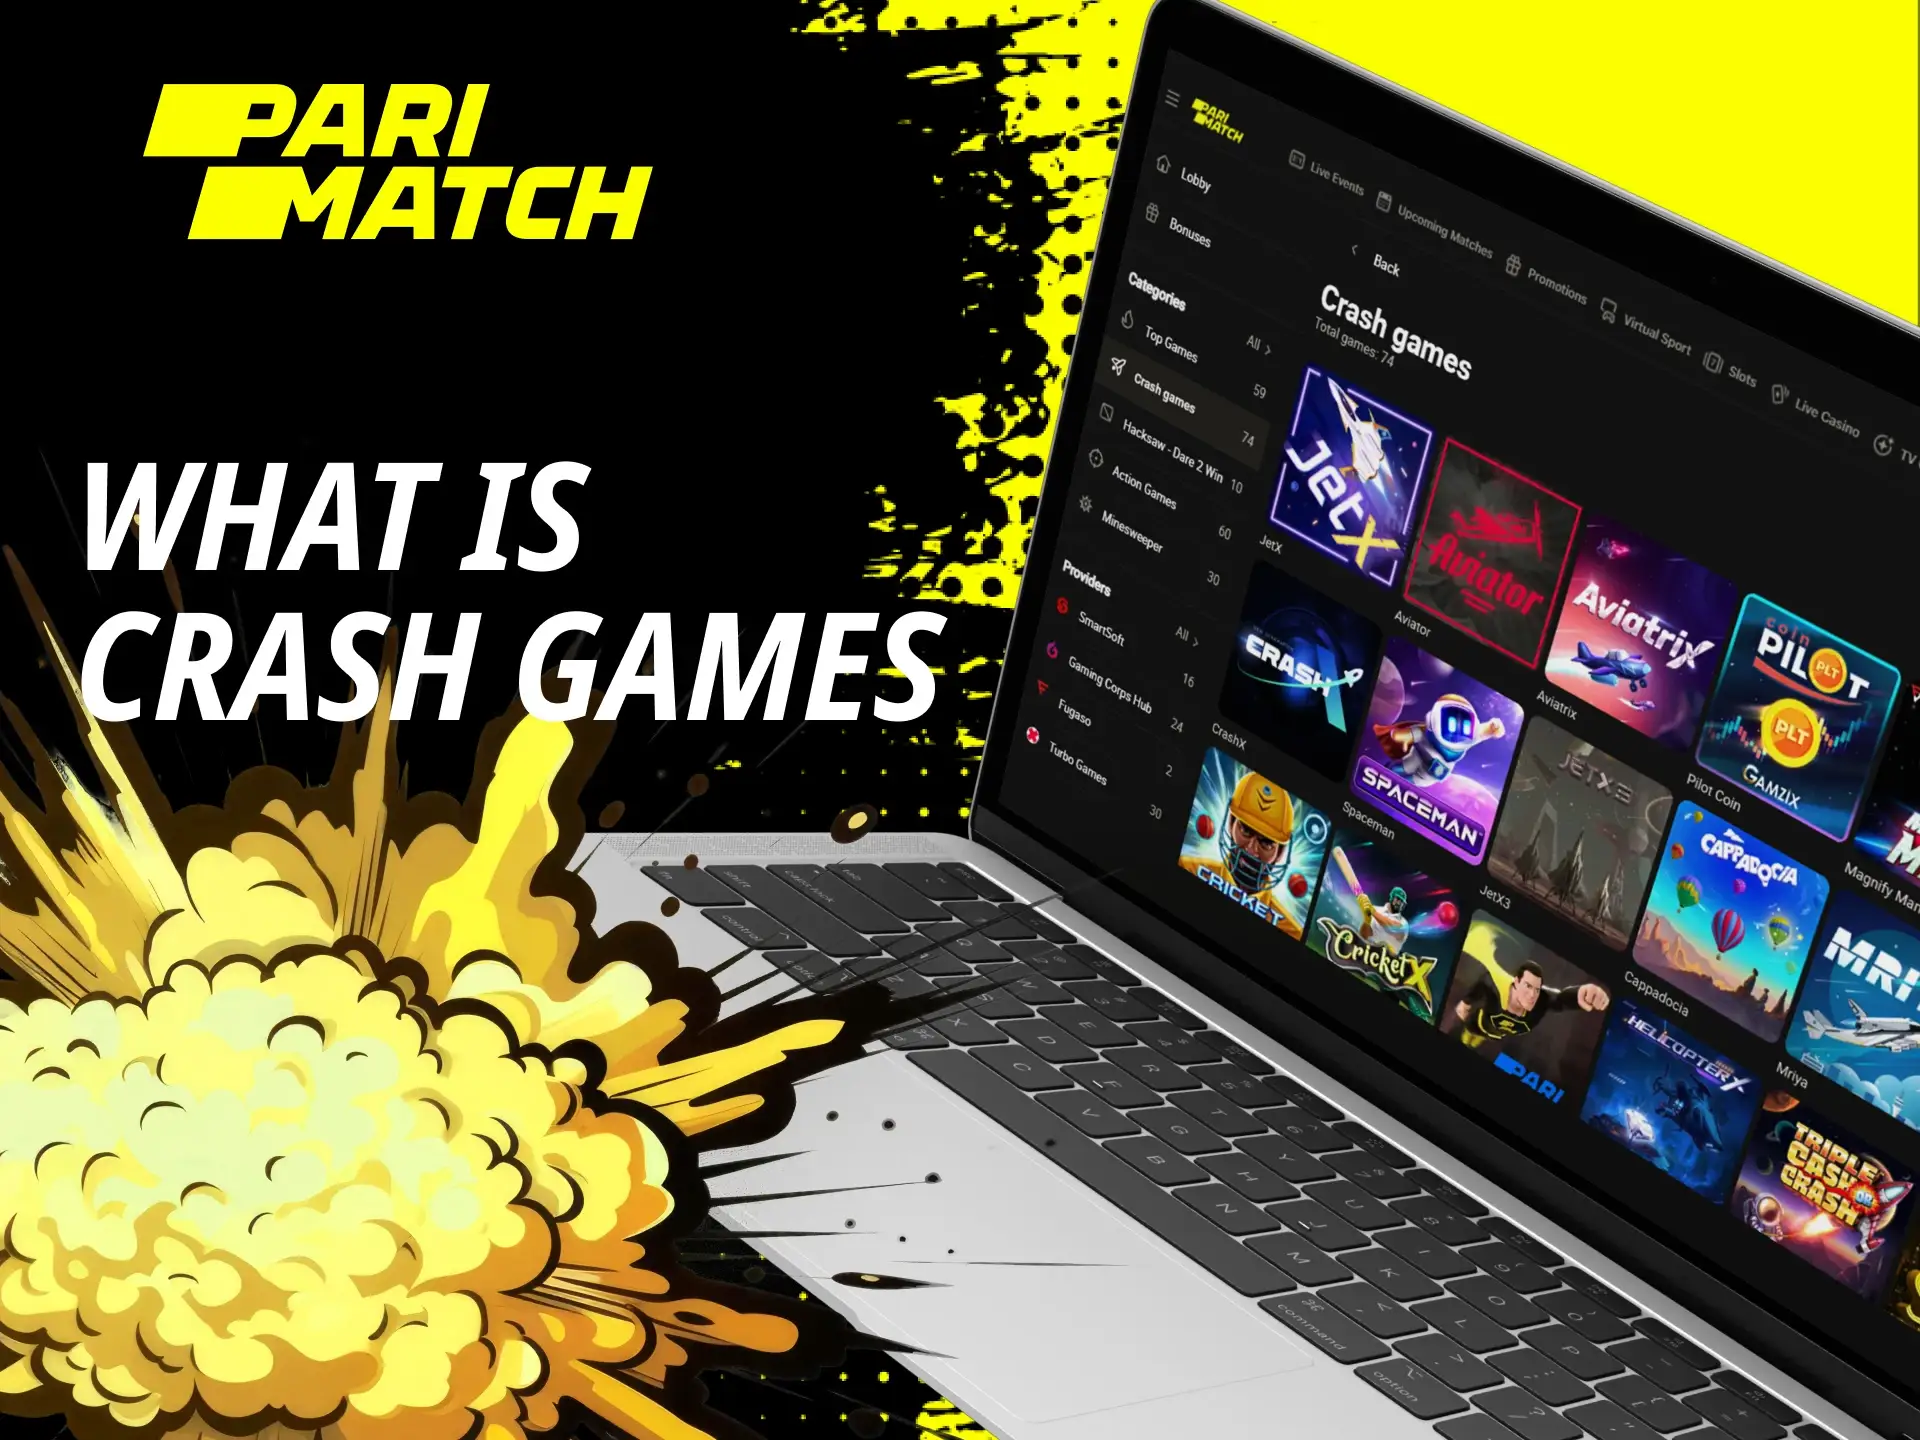 How should I play crash games on the Parimatch online casino website.